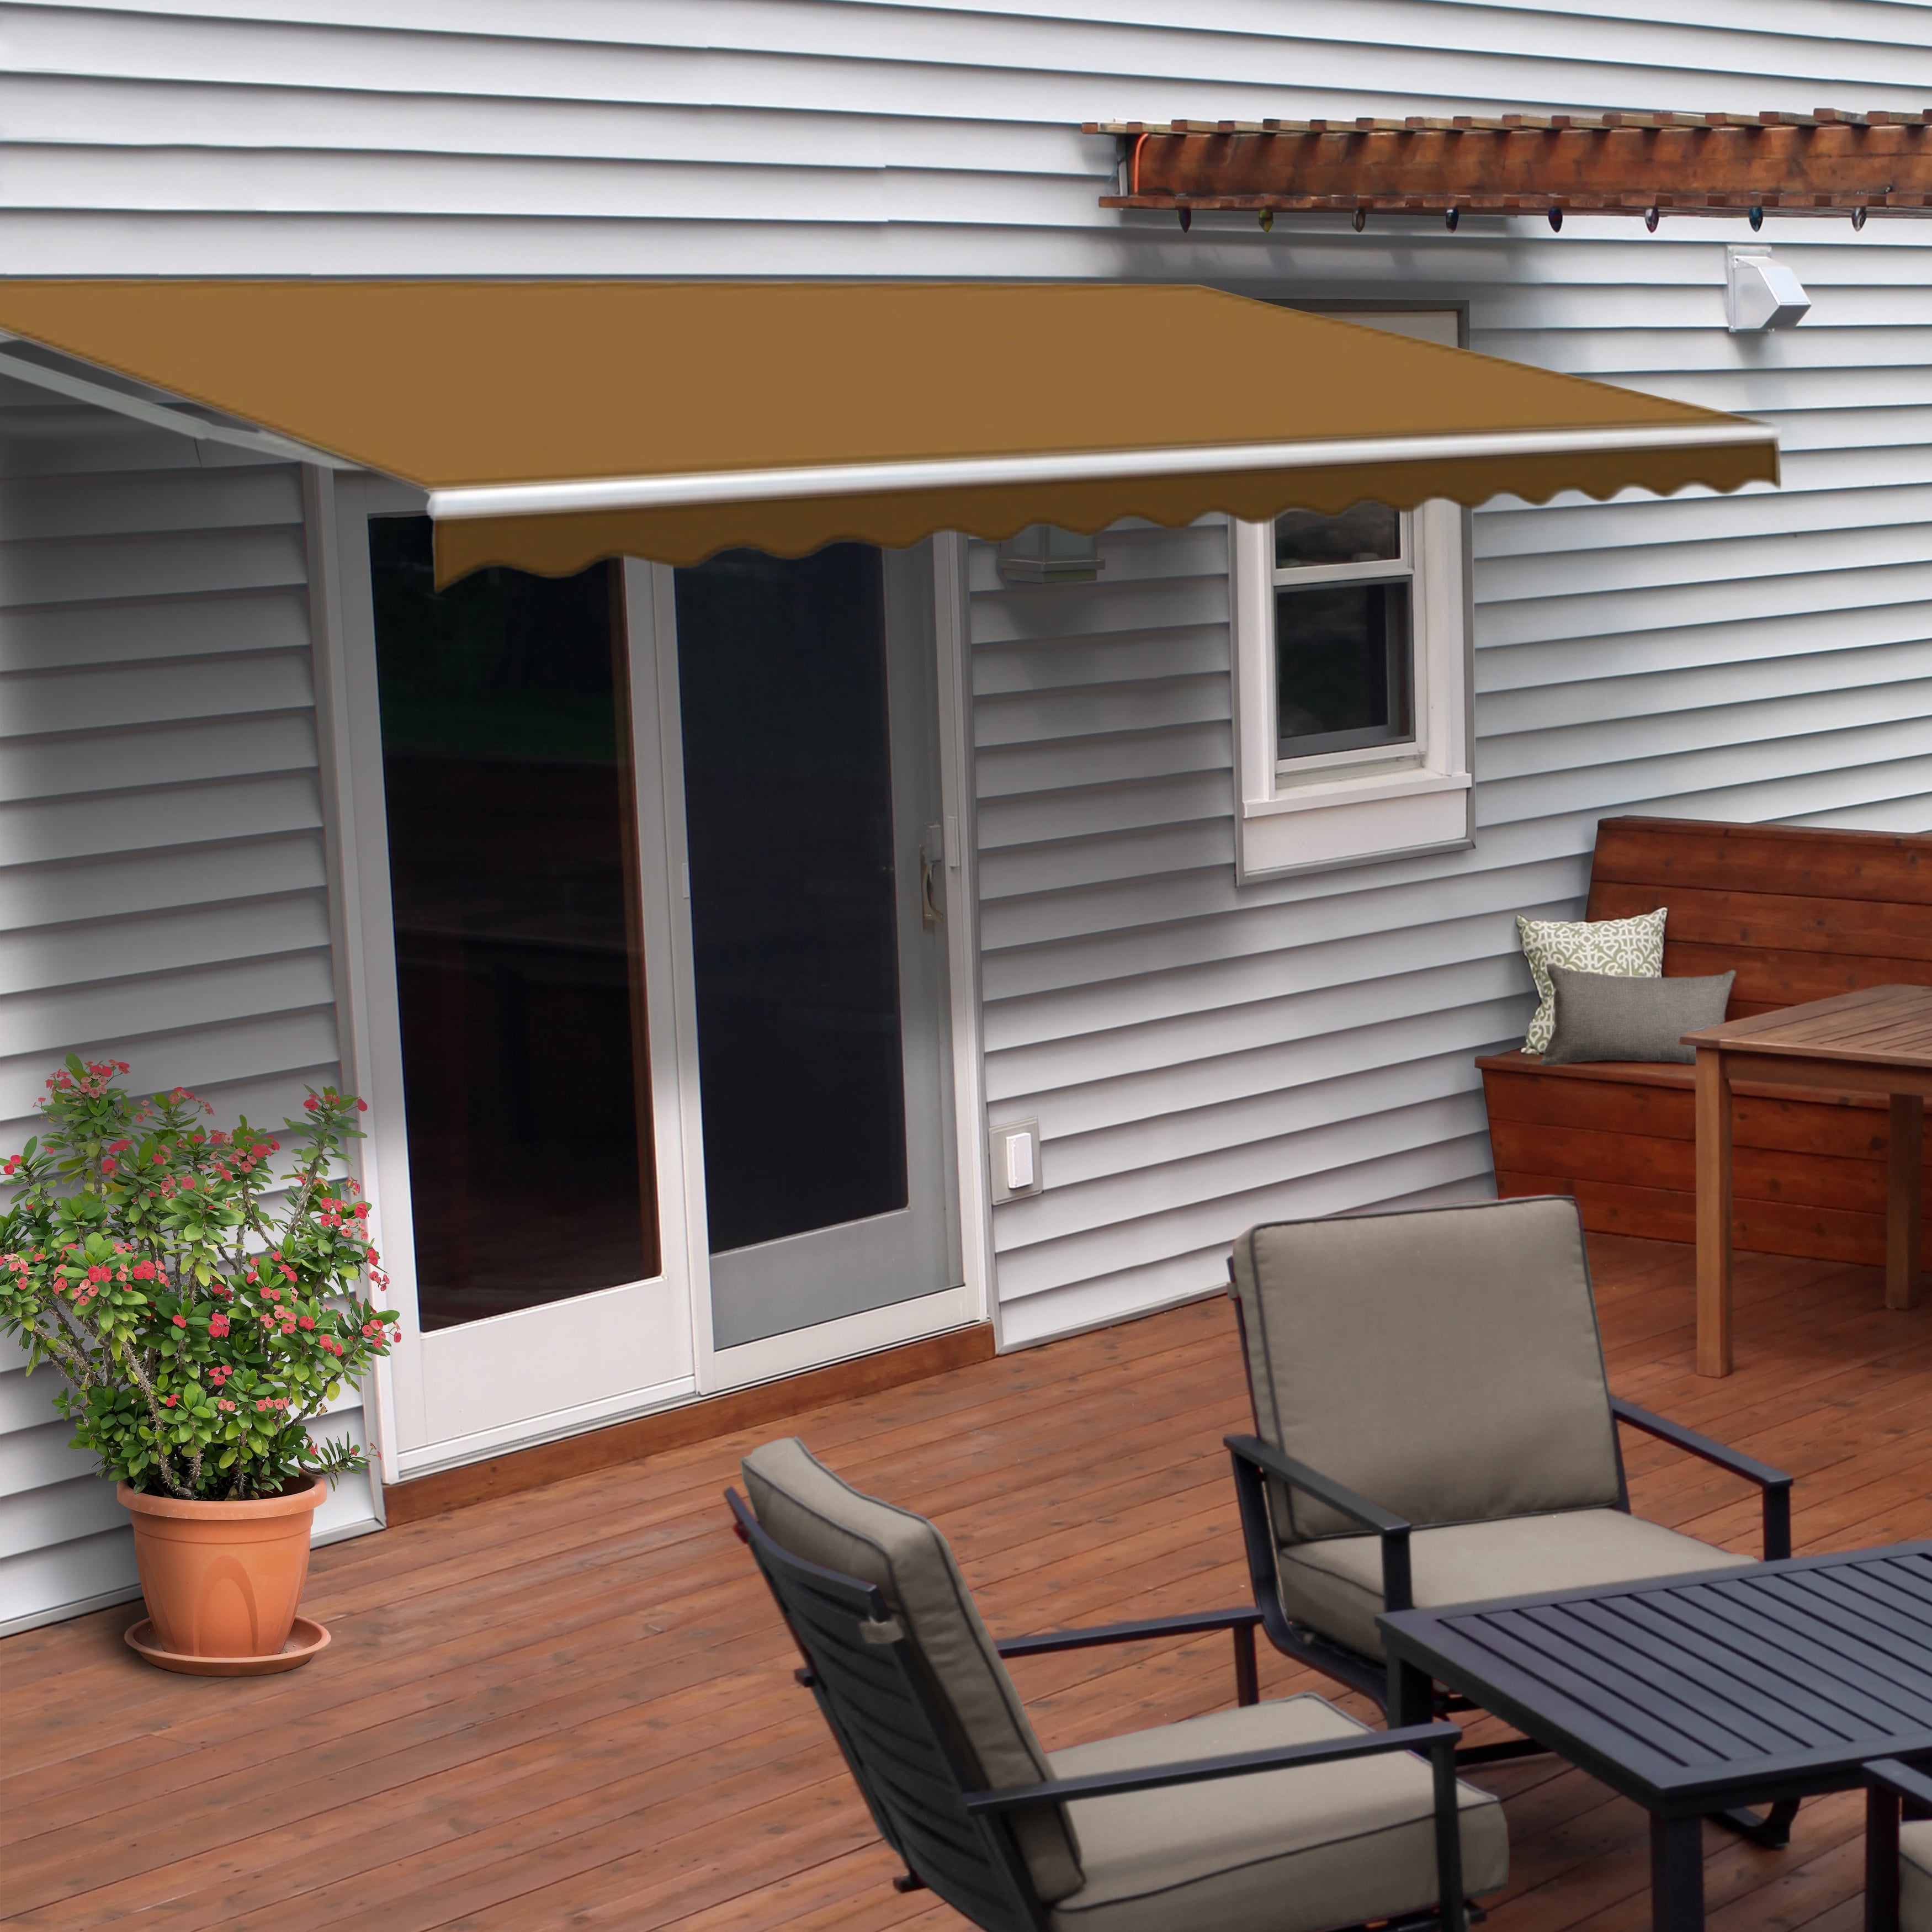 Sequoia 13w x10d Outdoor Patio Cover Manual Awning Retractable Sun Shade Shelter #52